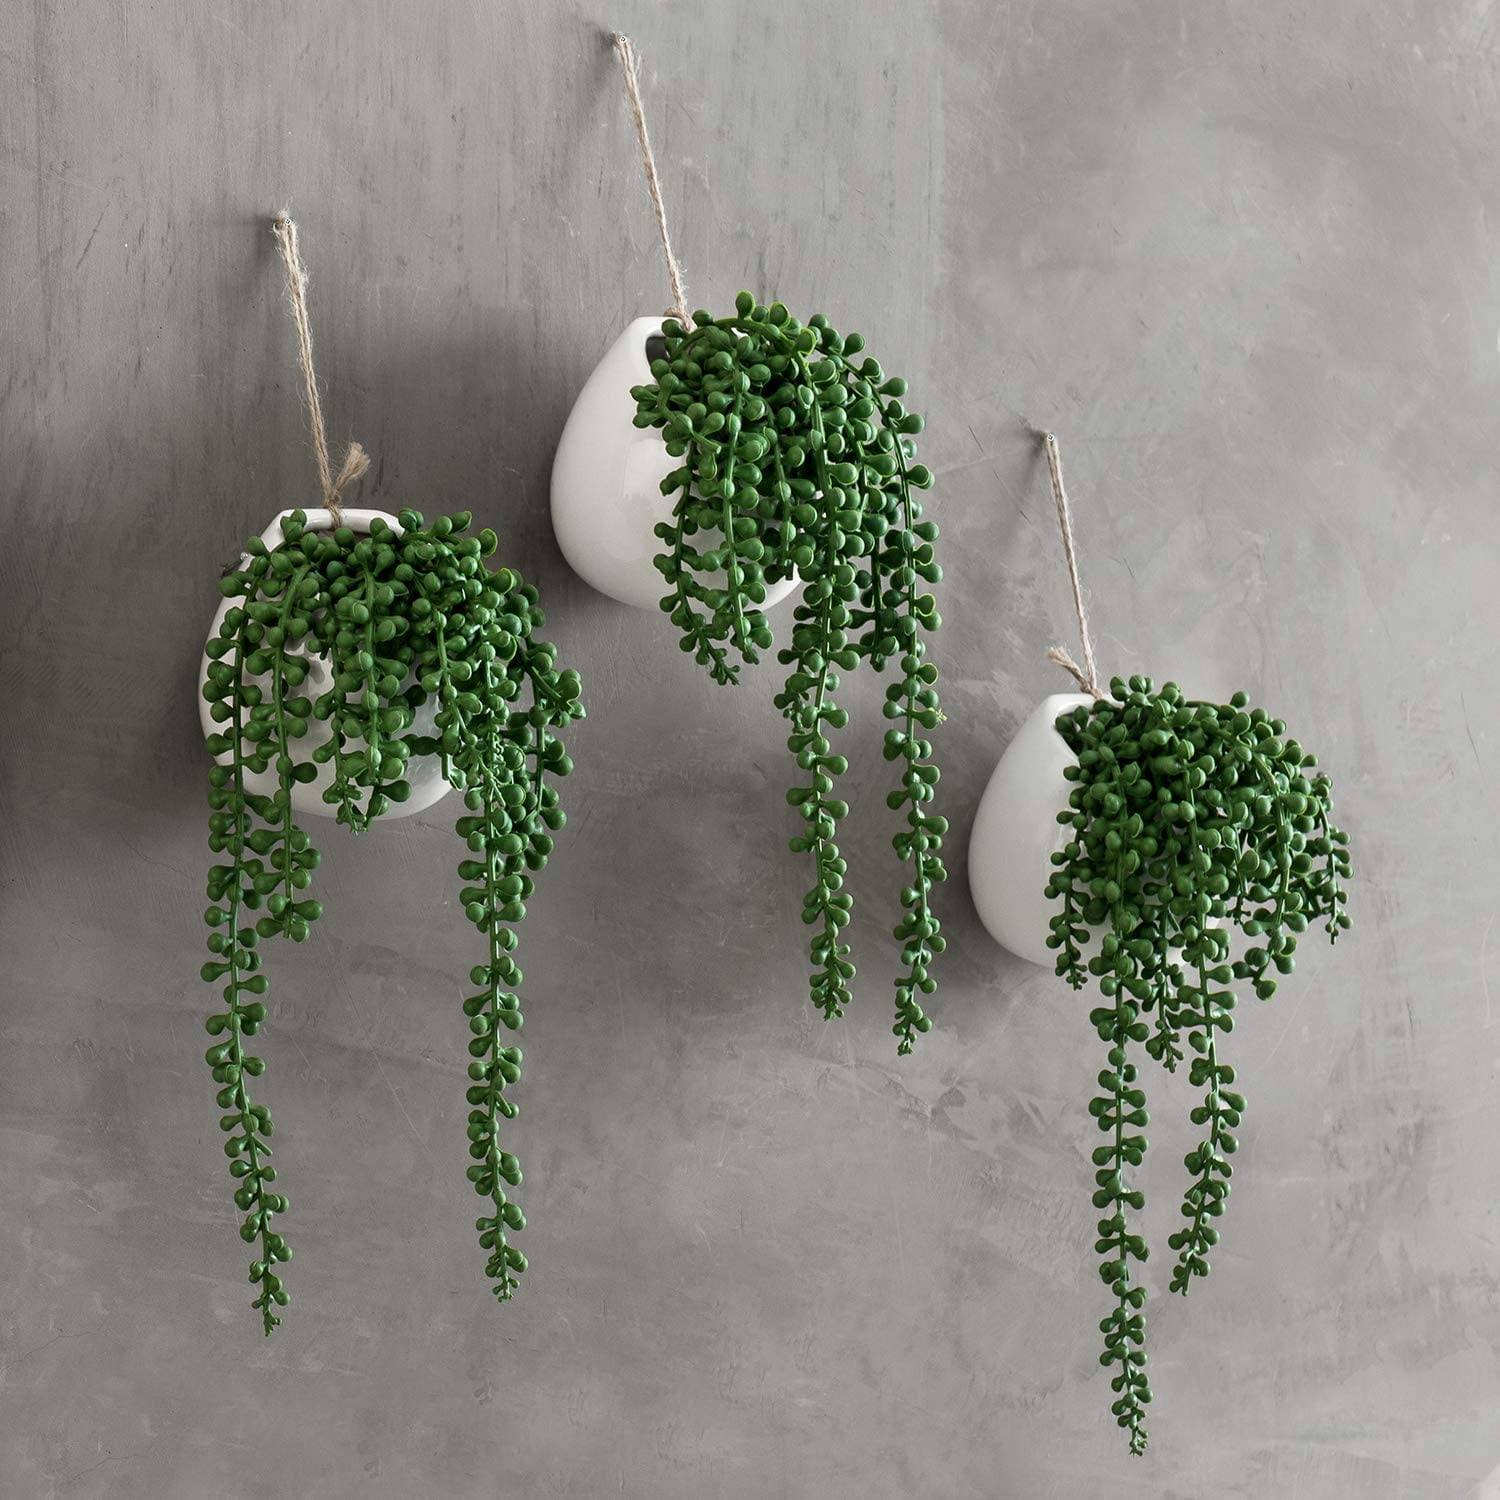 MyGift Set of 3 Wall Hanging Pearl White Ceramic Plant Vase Mounted Planters 